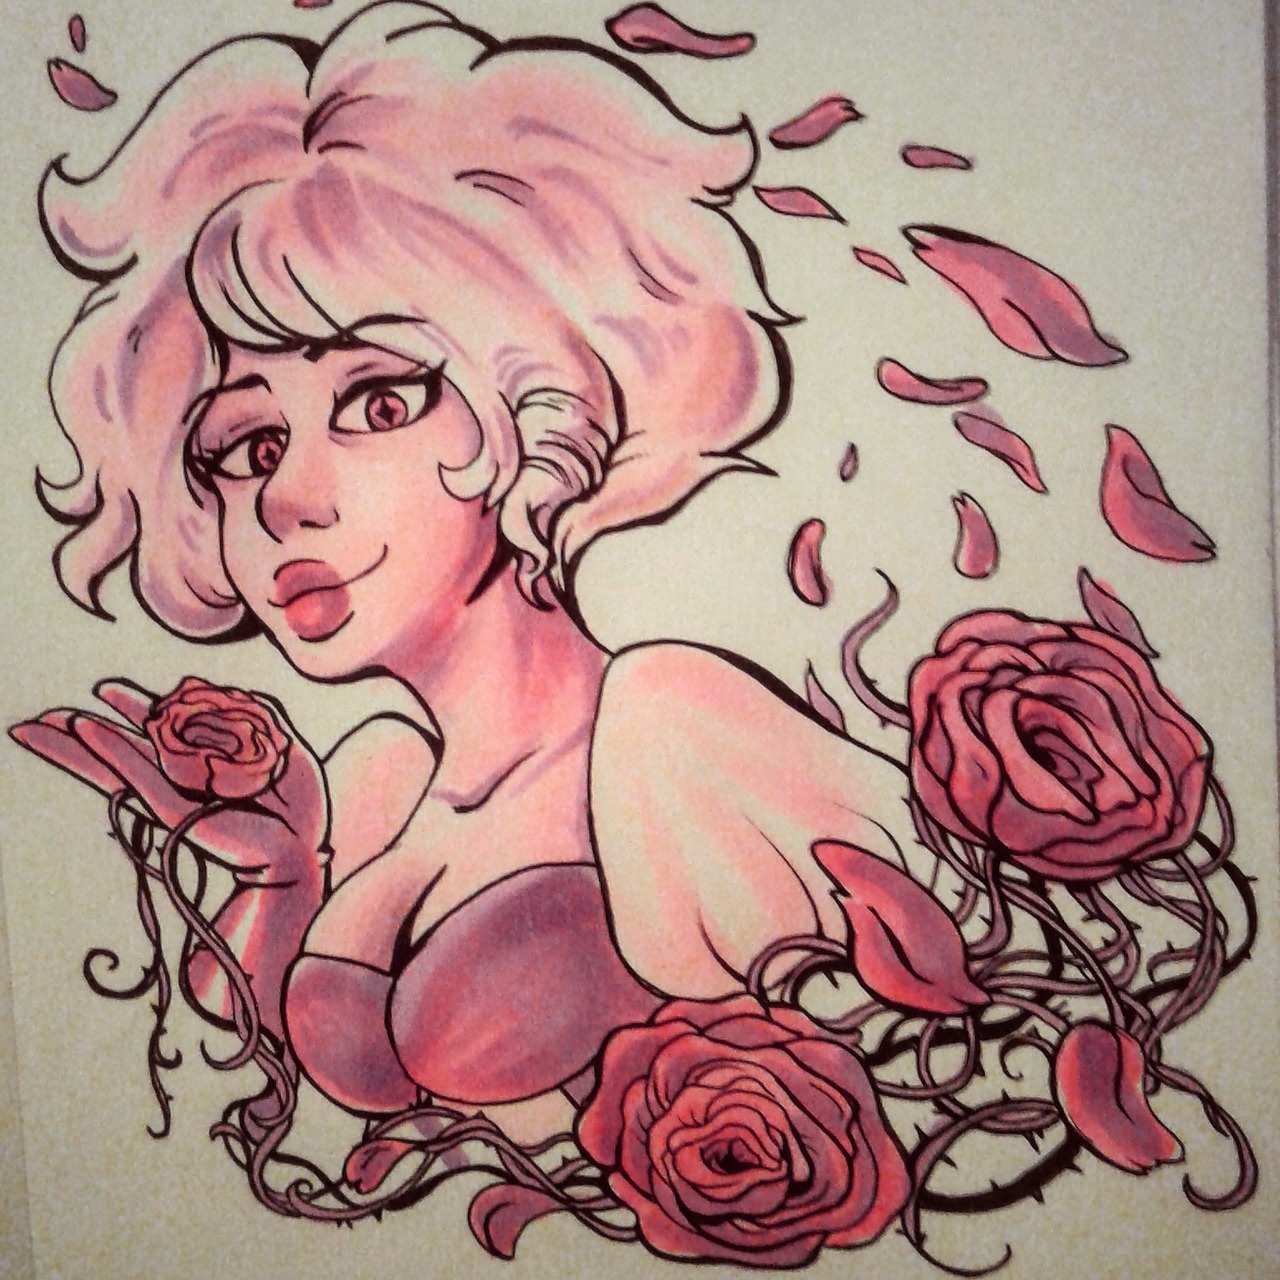 Pink Diamond with a Rosey touch EHEHE